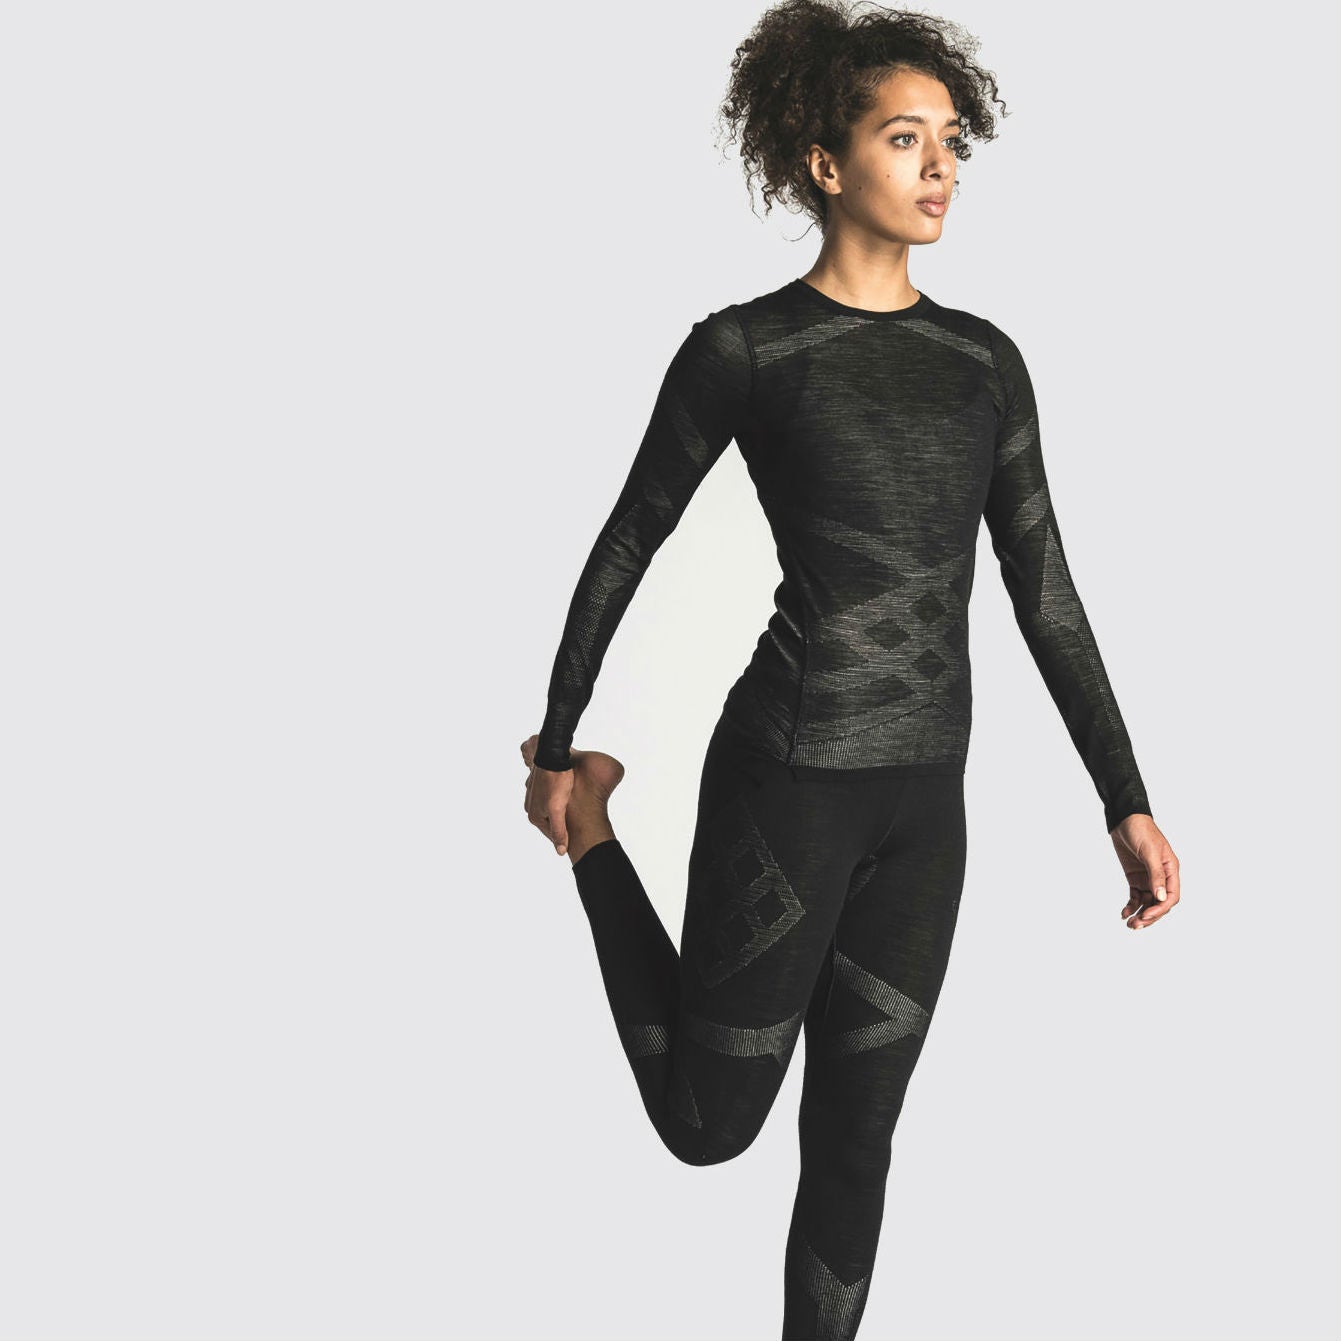 These Base Layers Are Made Like Socks—Here's Why